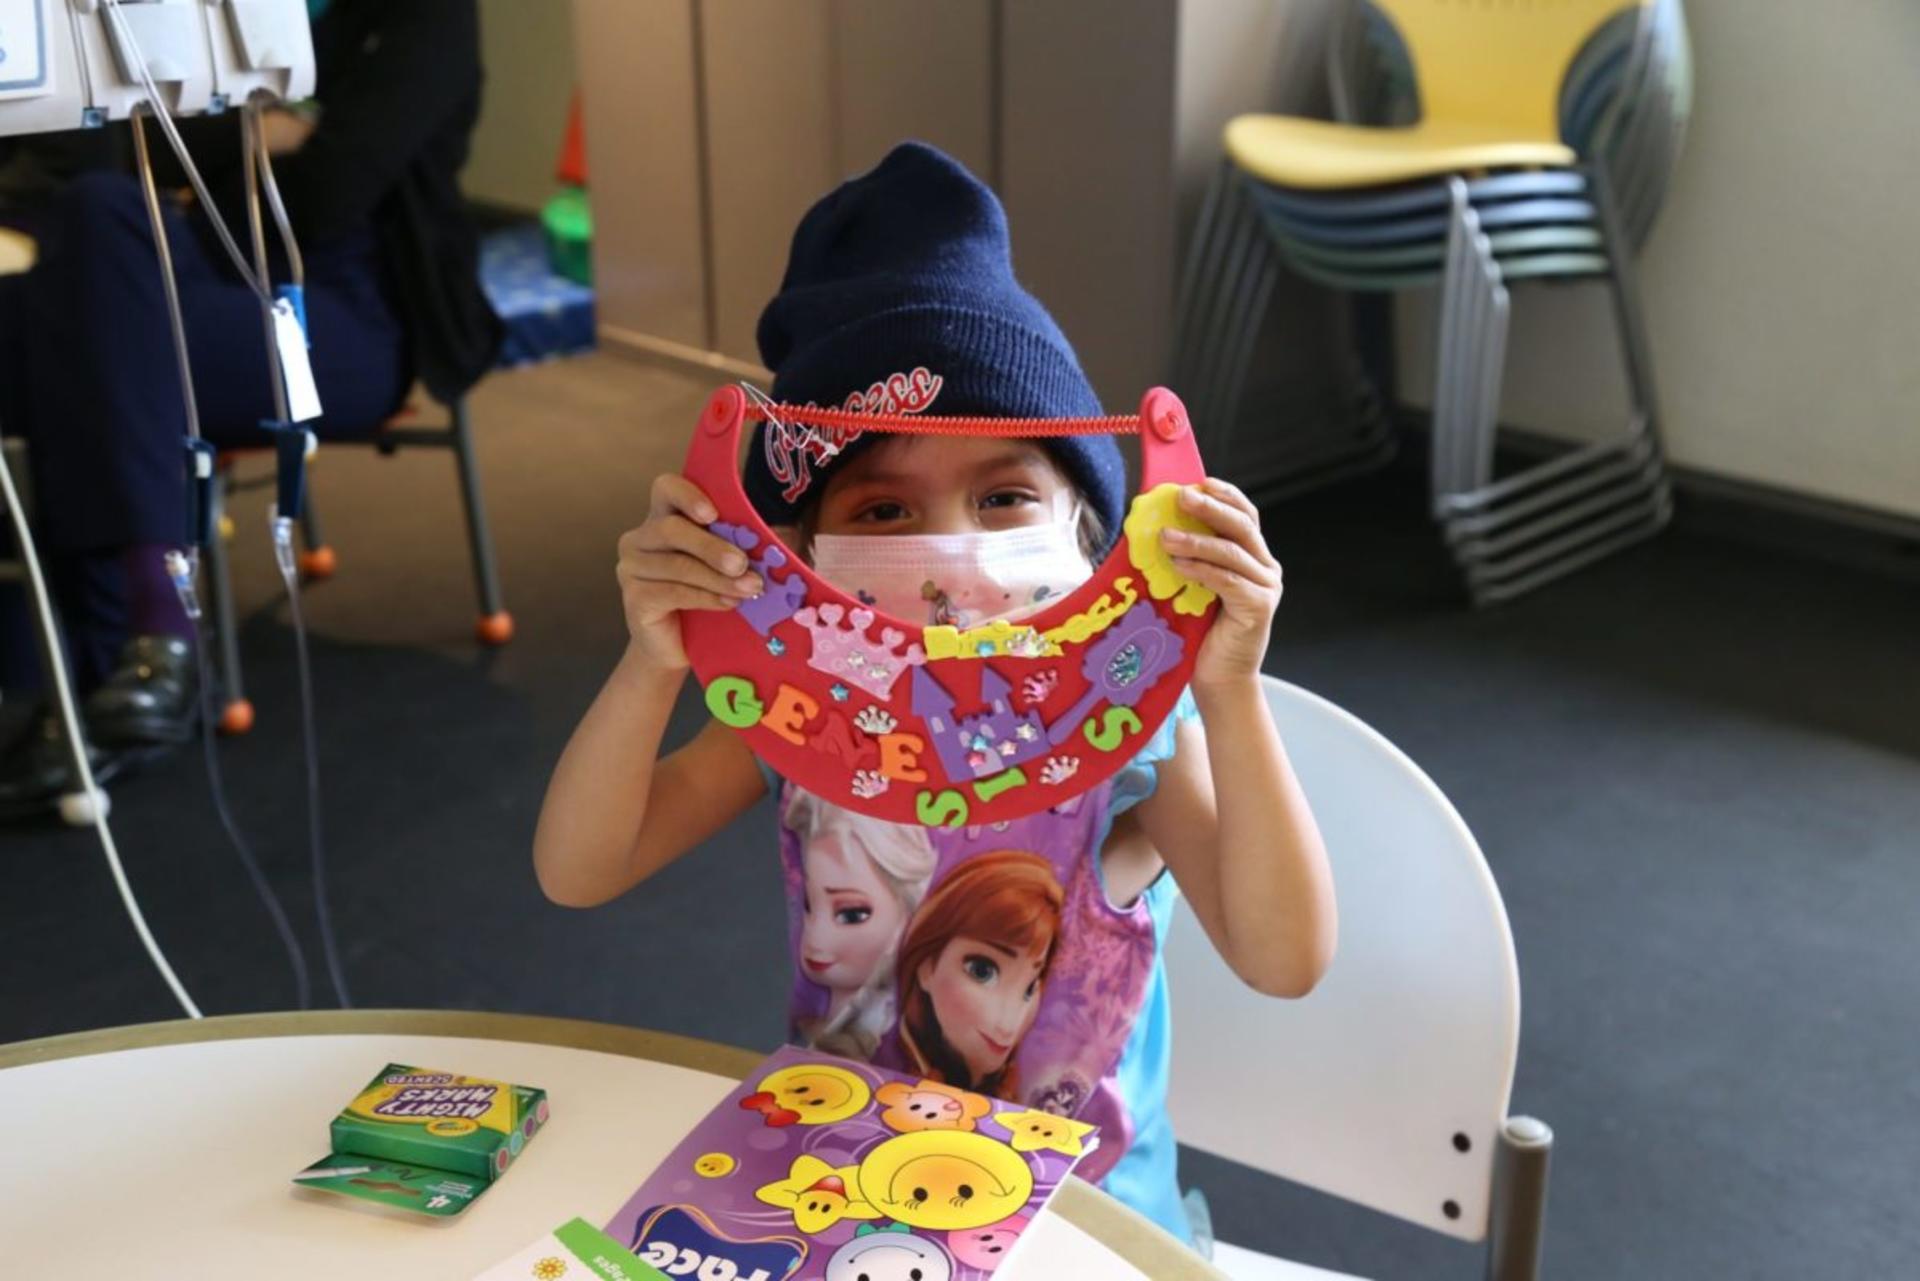 Genesis, age 3, playing with arts and crafts delivered by Michaels (Michaels delivered nearly 30,000 of these backpacks to hospitalized kids across the nation)